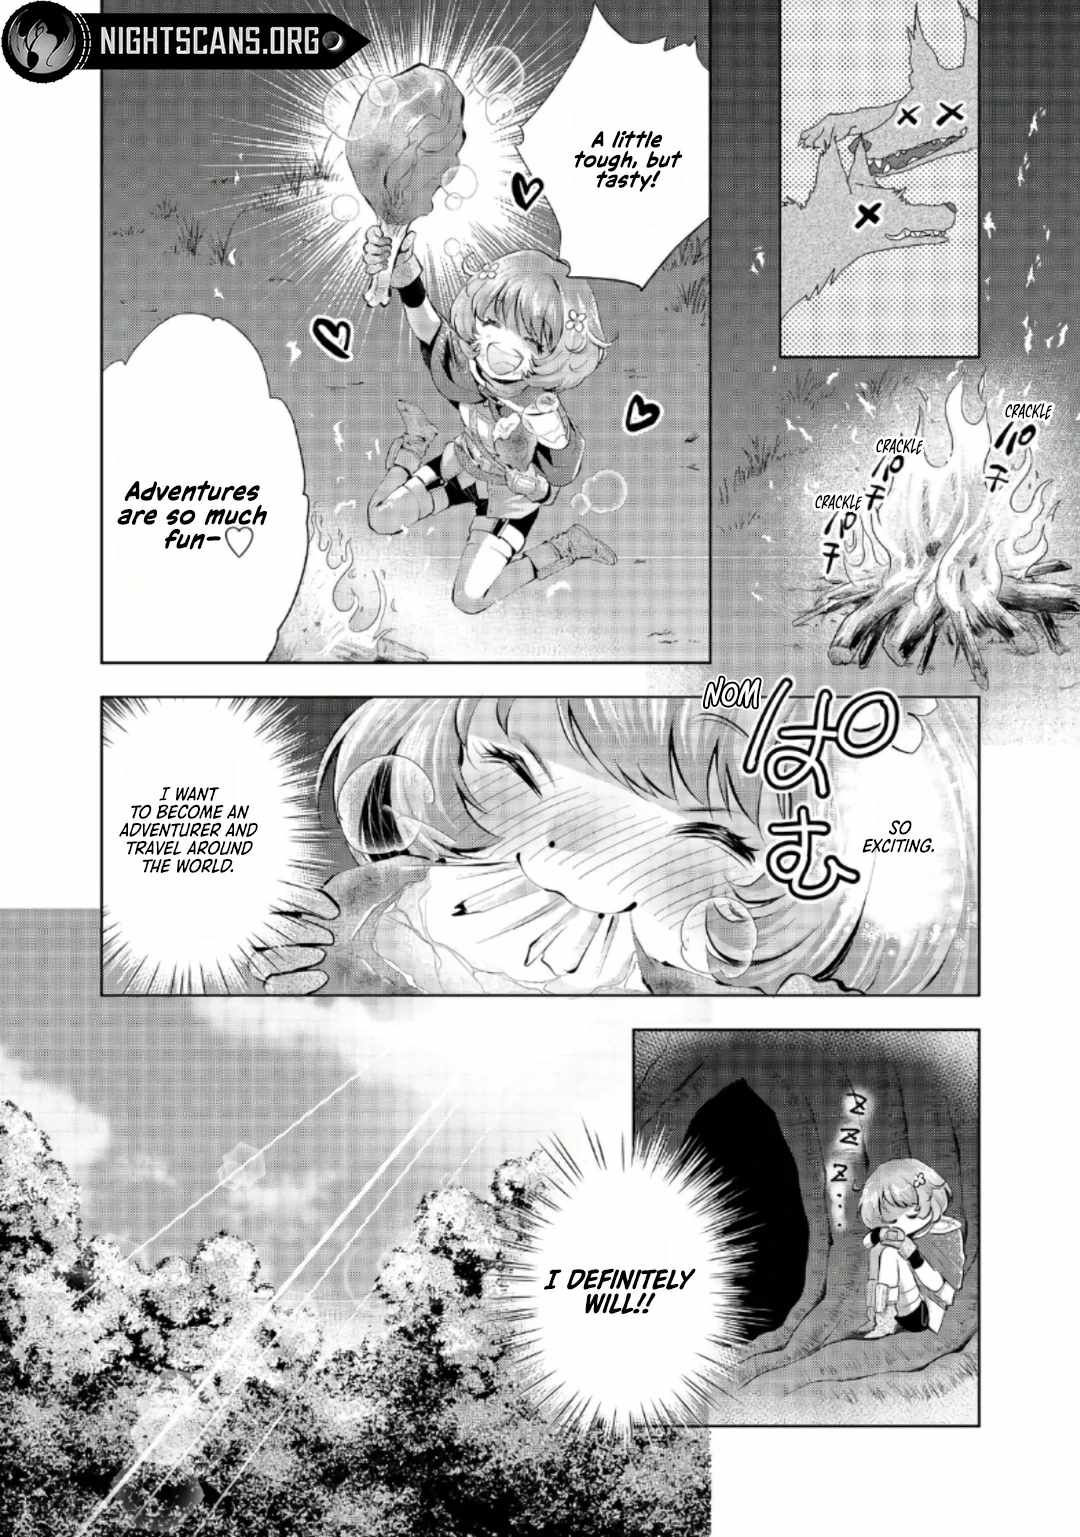 The Girl Who Was Told “You Have No Talent” Had Monstrous Talent Chapter 5-1-eng-li - Page 10